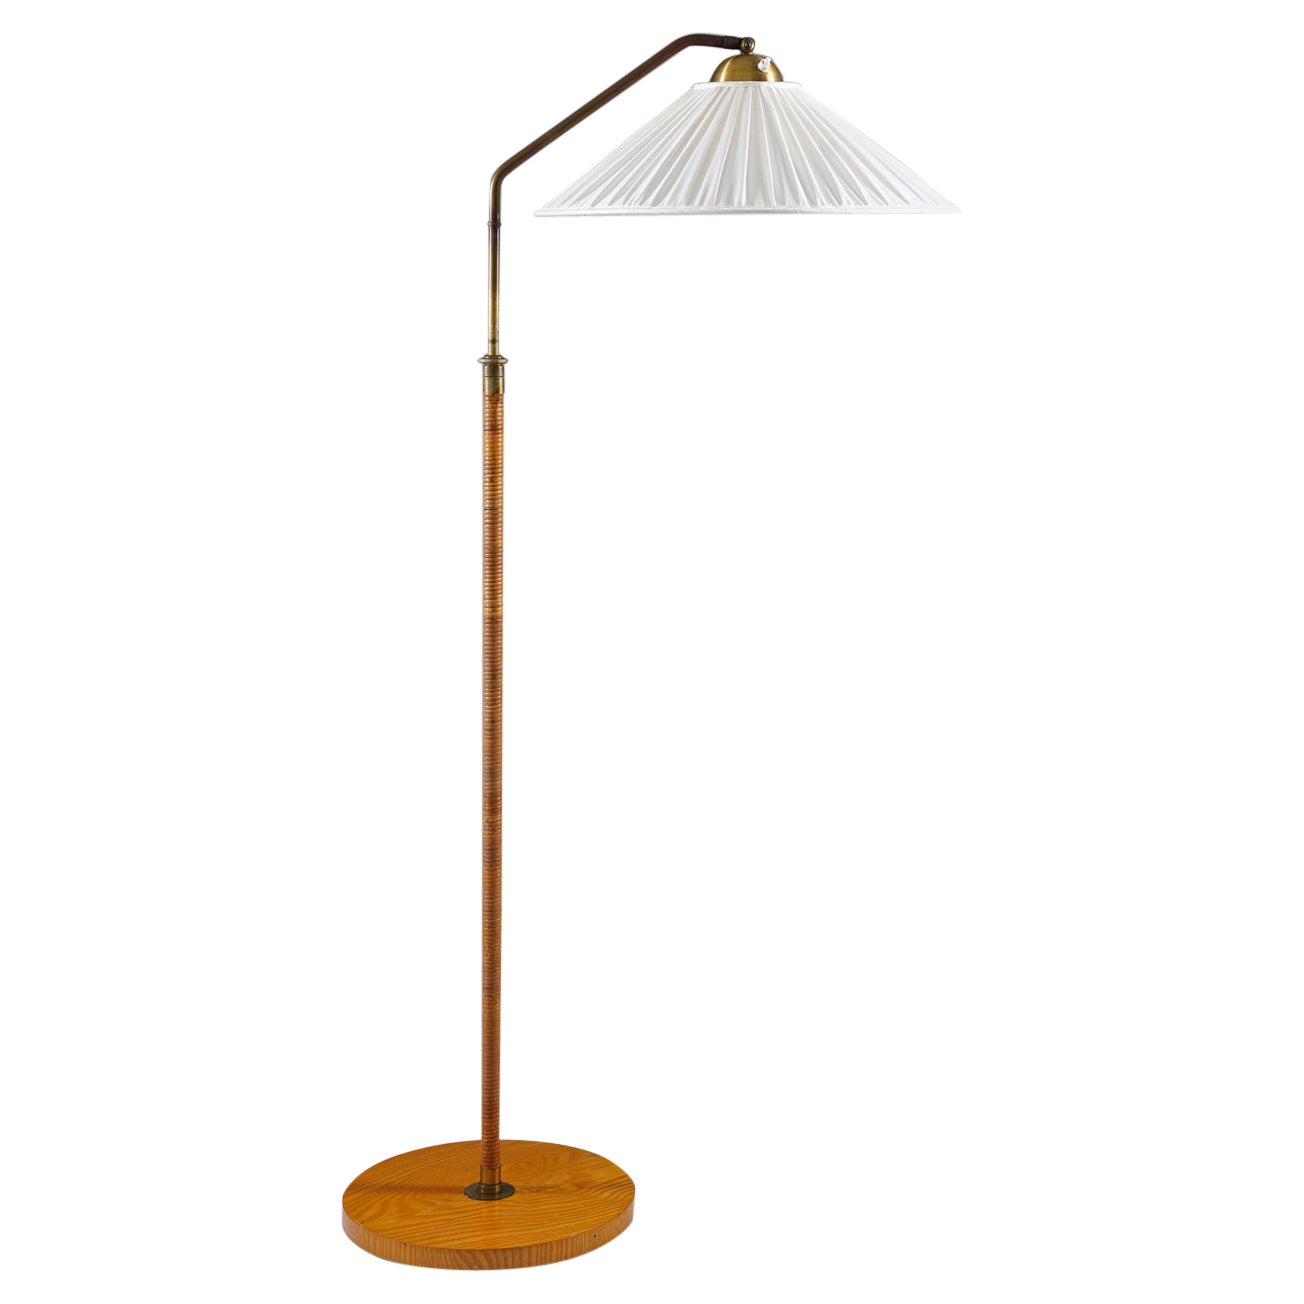 Swedish Modern Floor Lamp in Rattan and Brass, 1940s For Sale